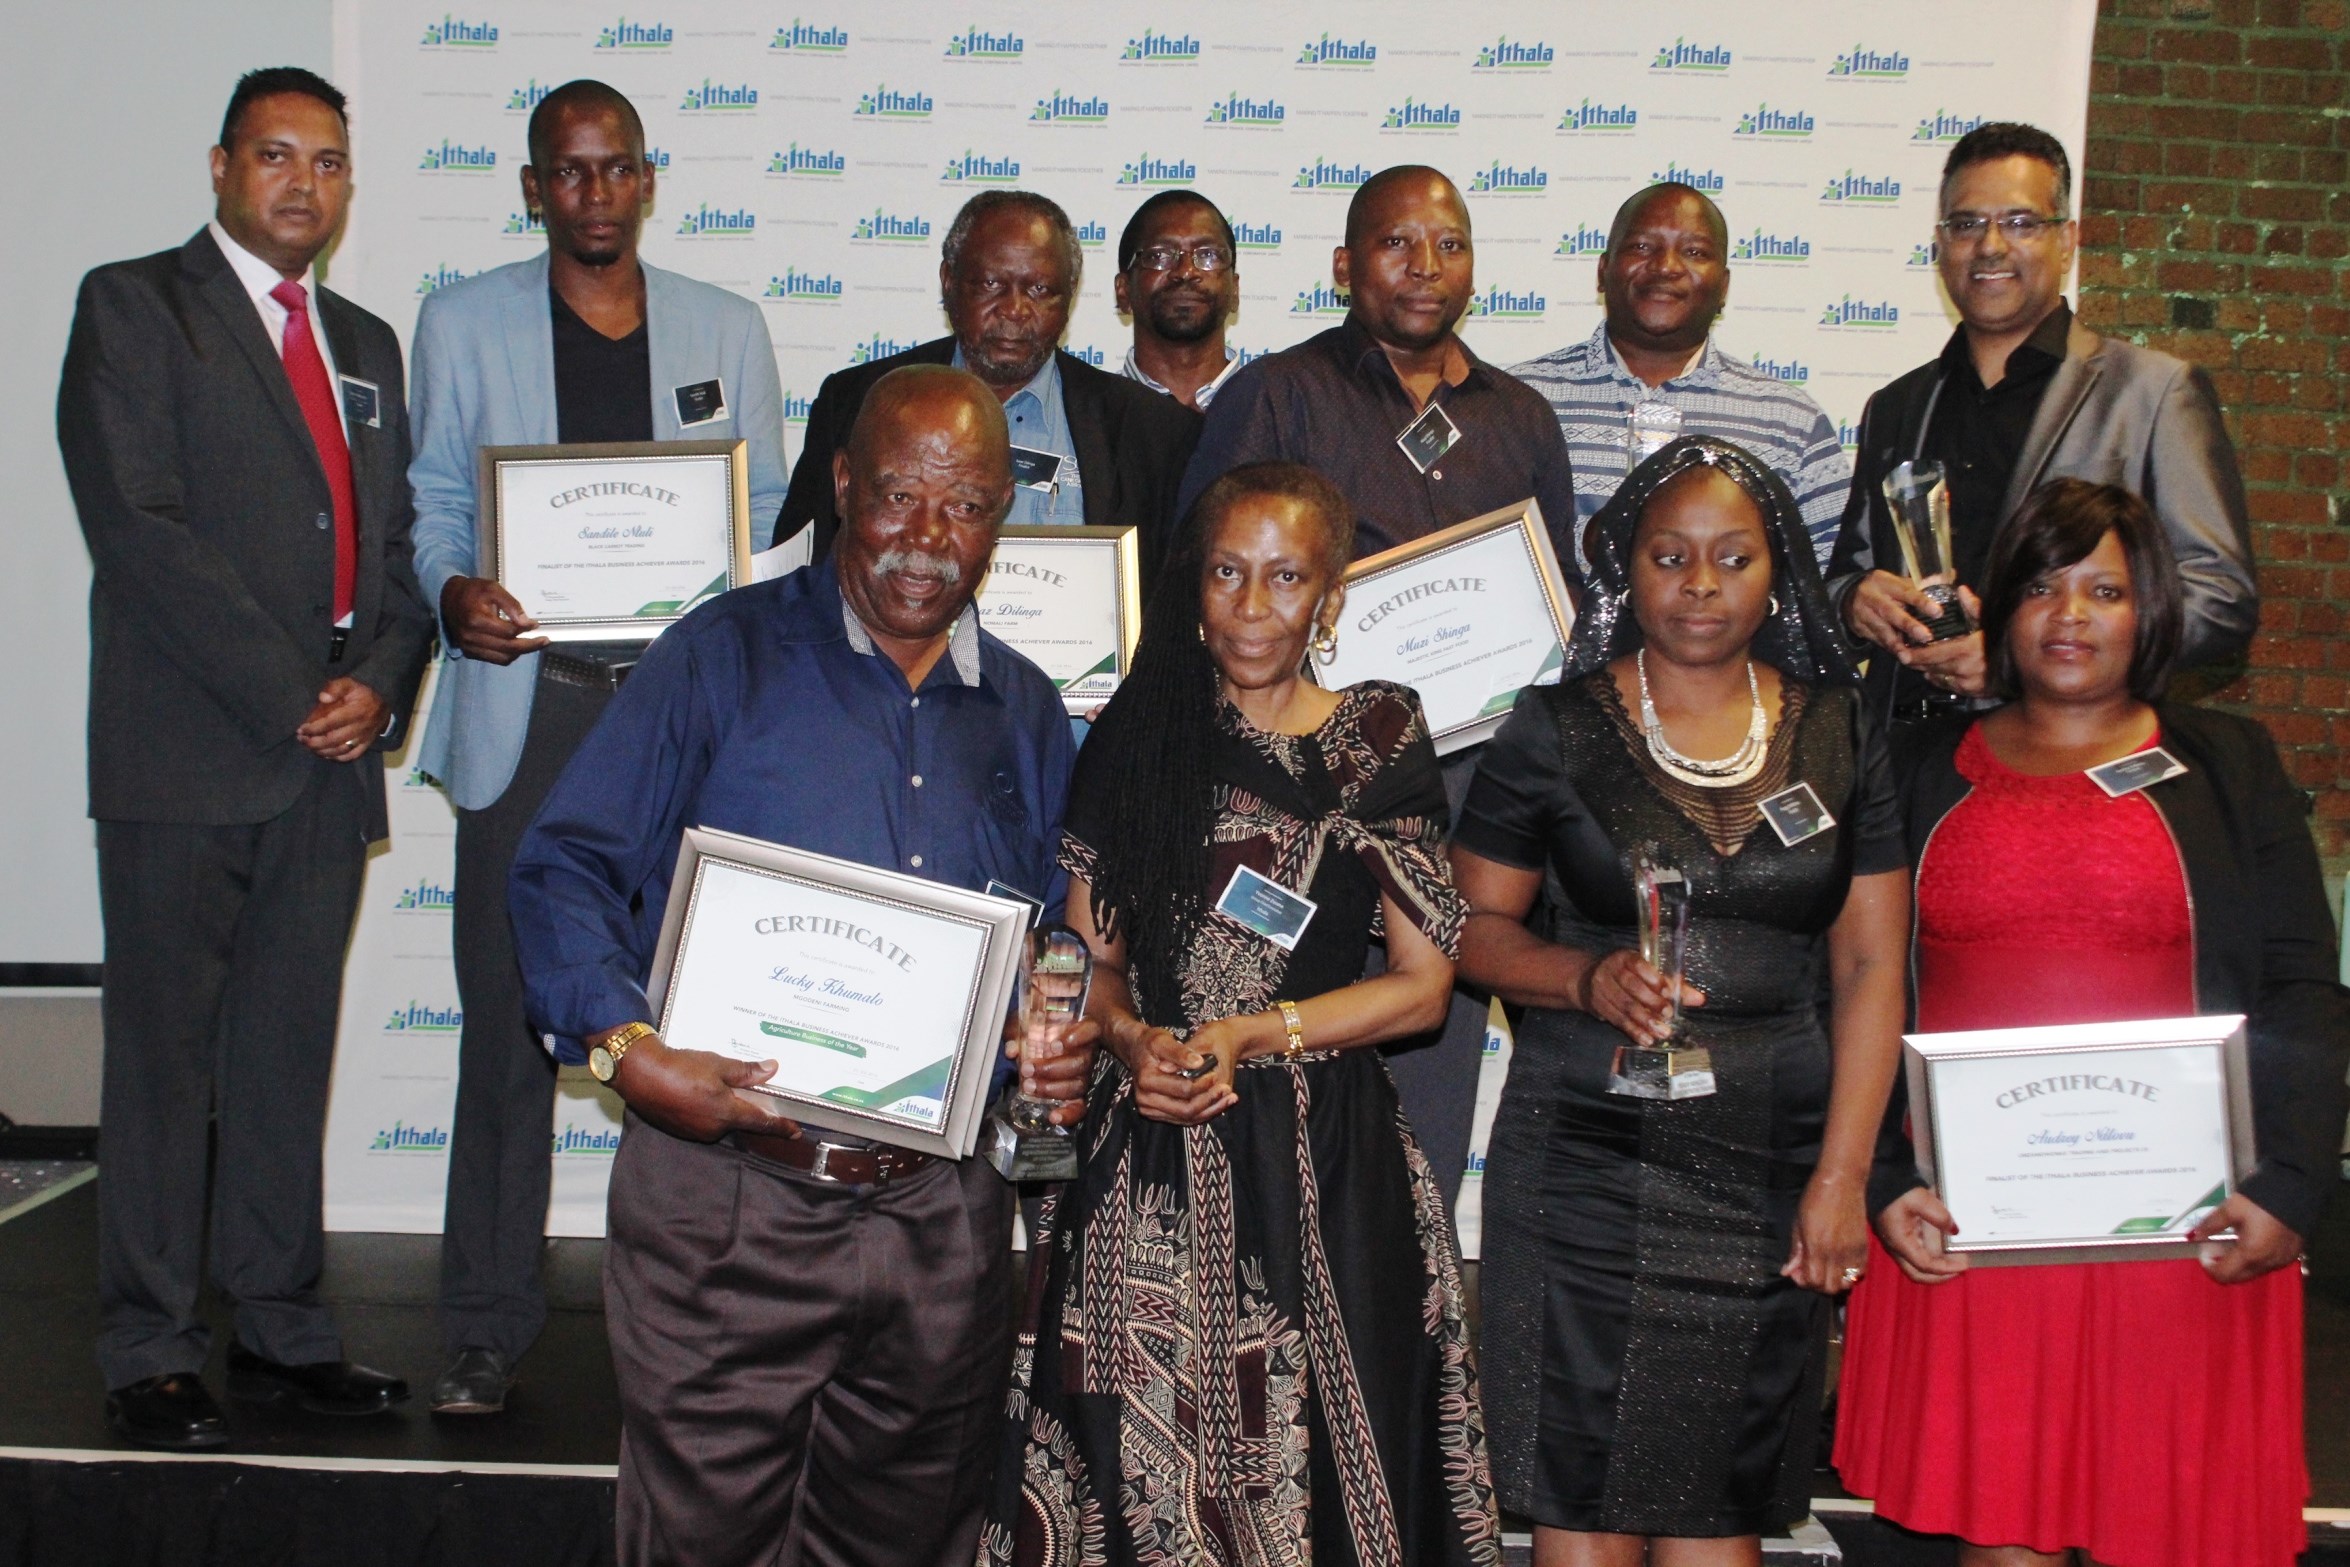 Business achievers take centre stage at awards ceremony